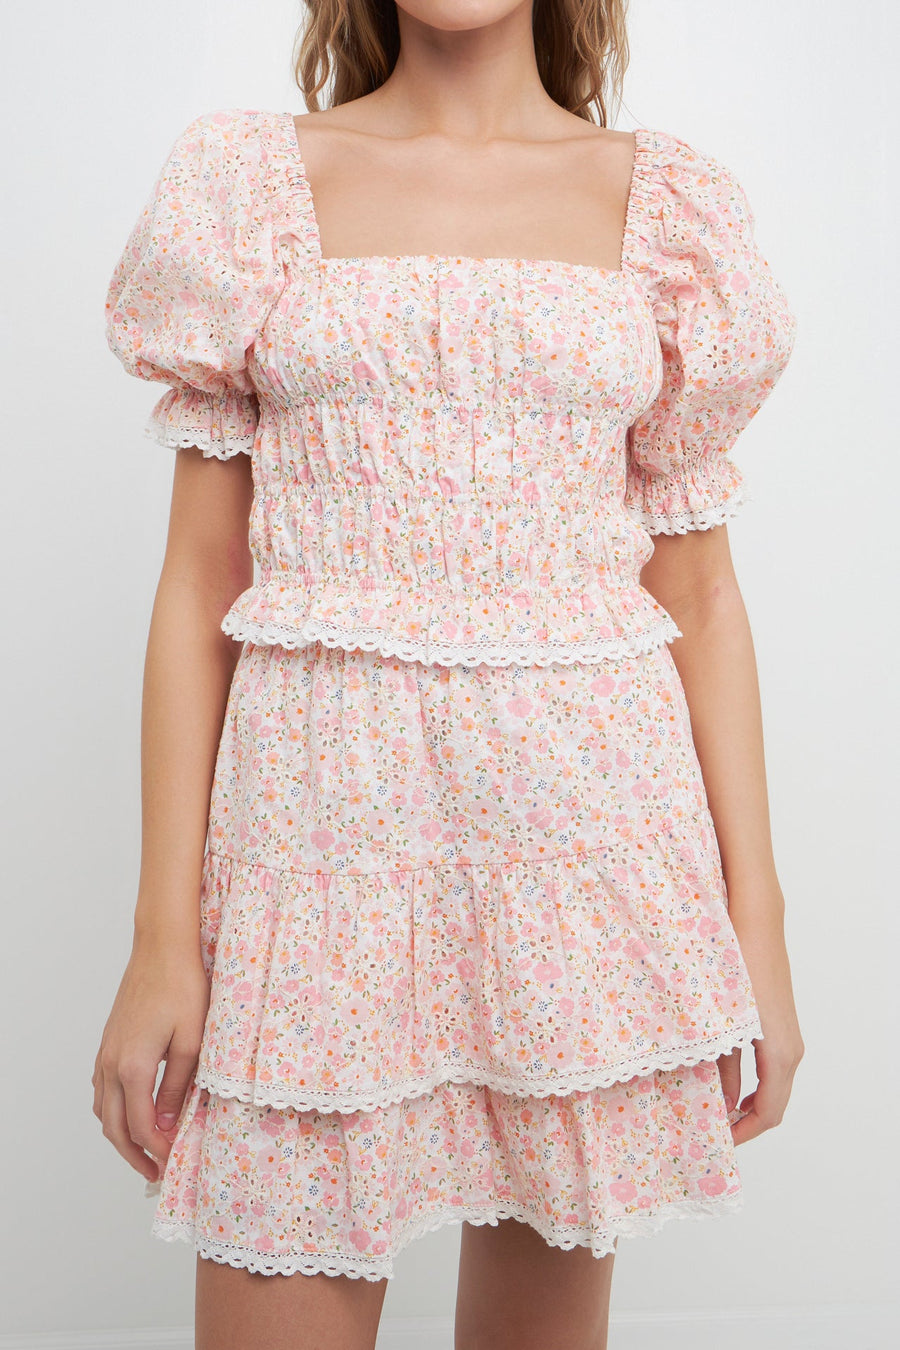 FREE THE ROSES-Floral Eyelet Smocked Cropped Top-TOPS available at Objectrare